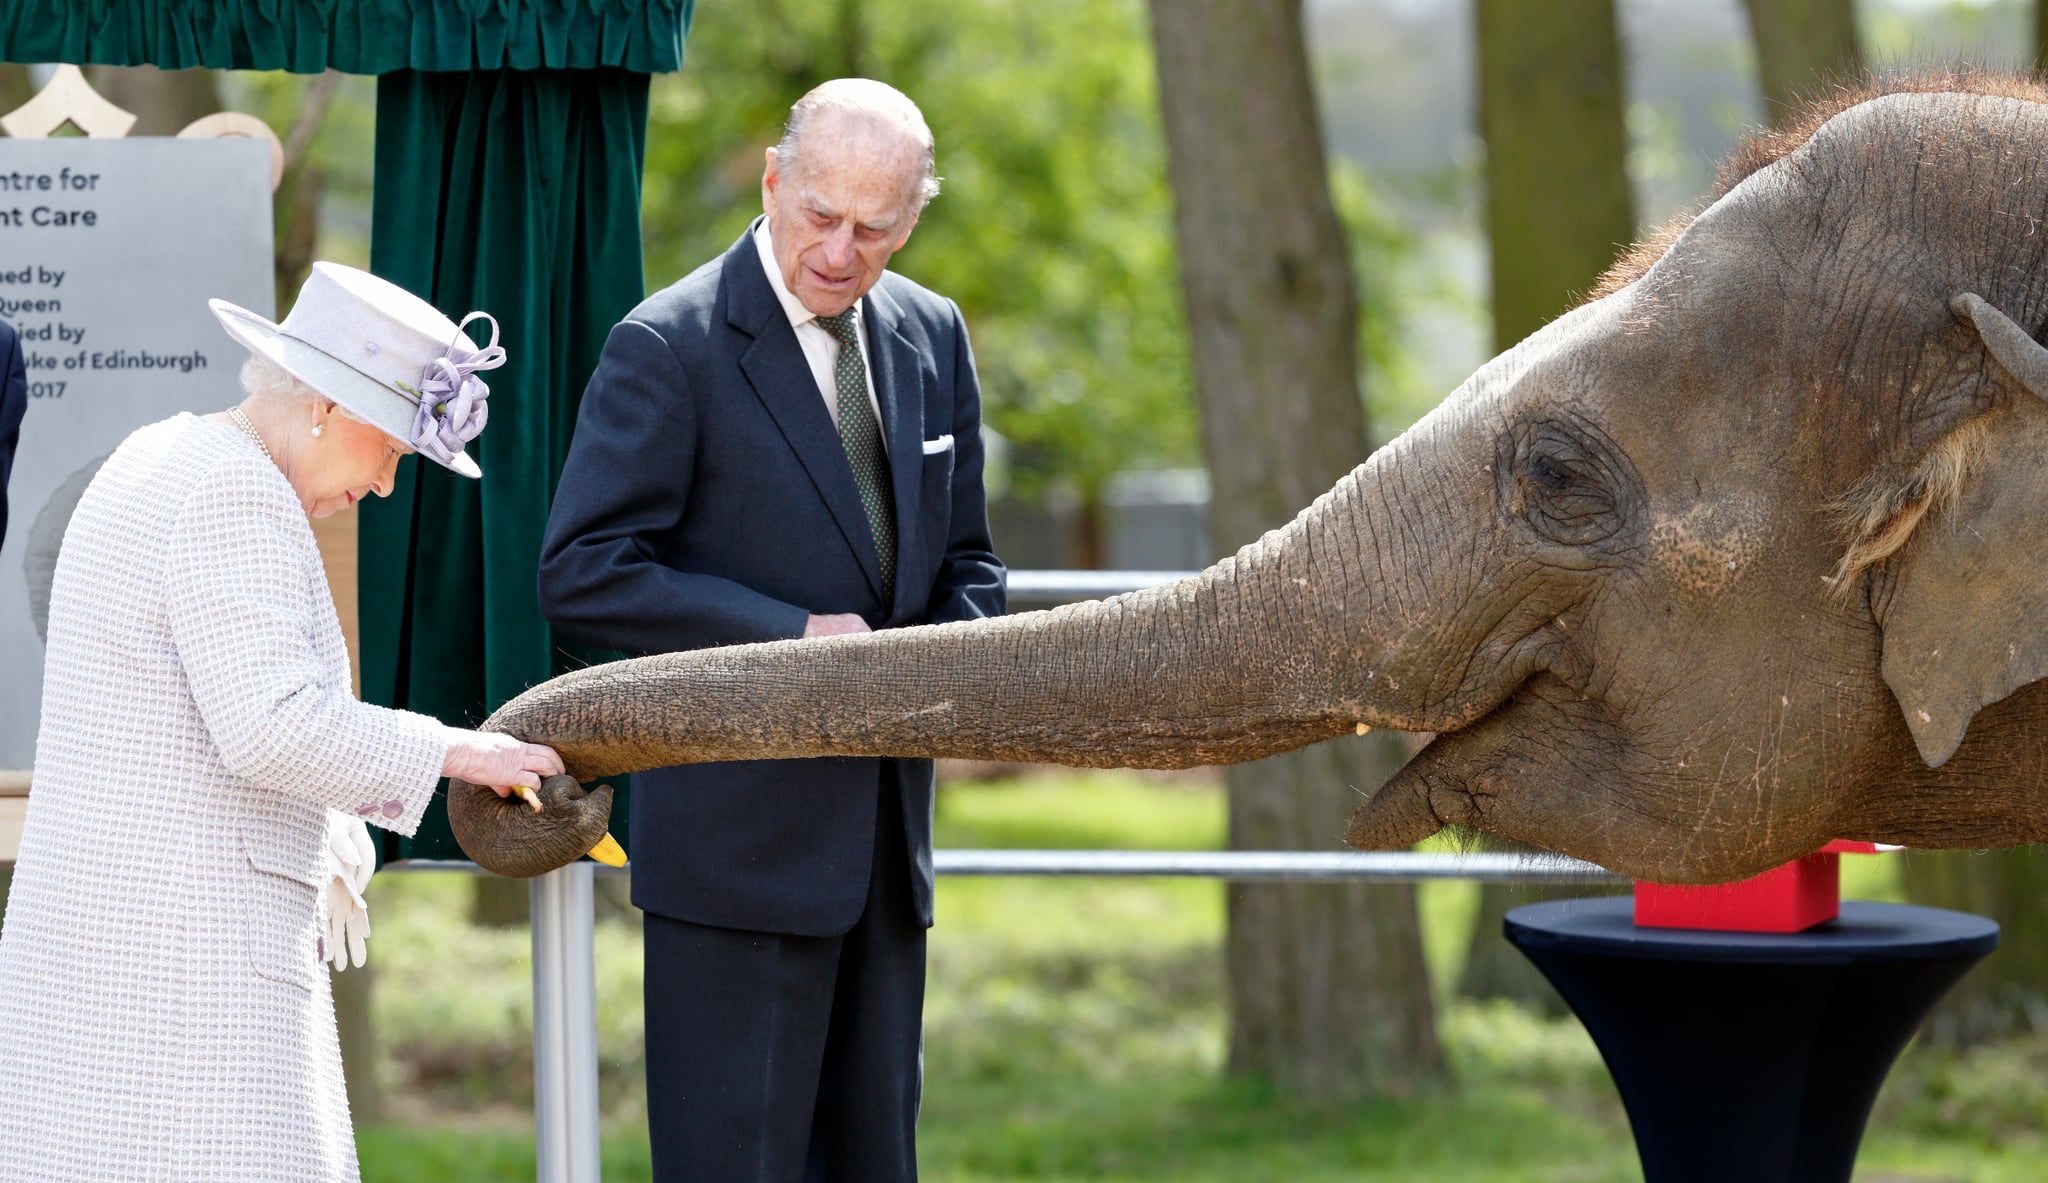 Queen Elizabeth II and Prince Philip feed an elephant in 2017